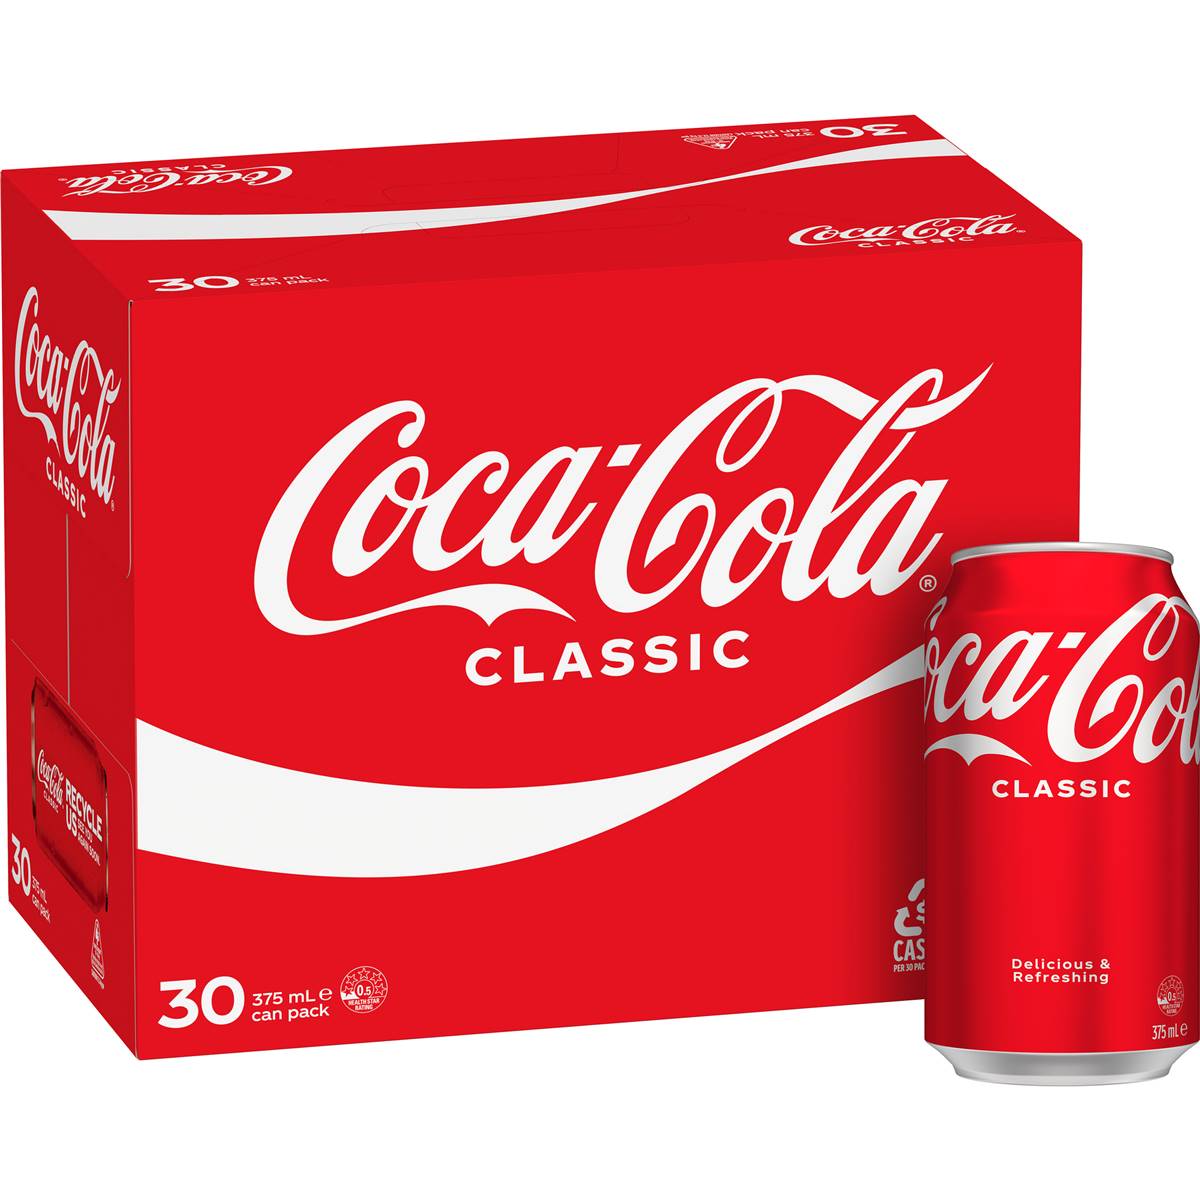 Calories in Coca-cola Classic Soft Drink Cans